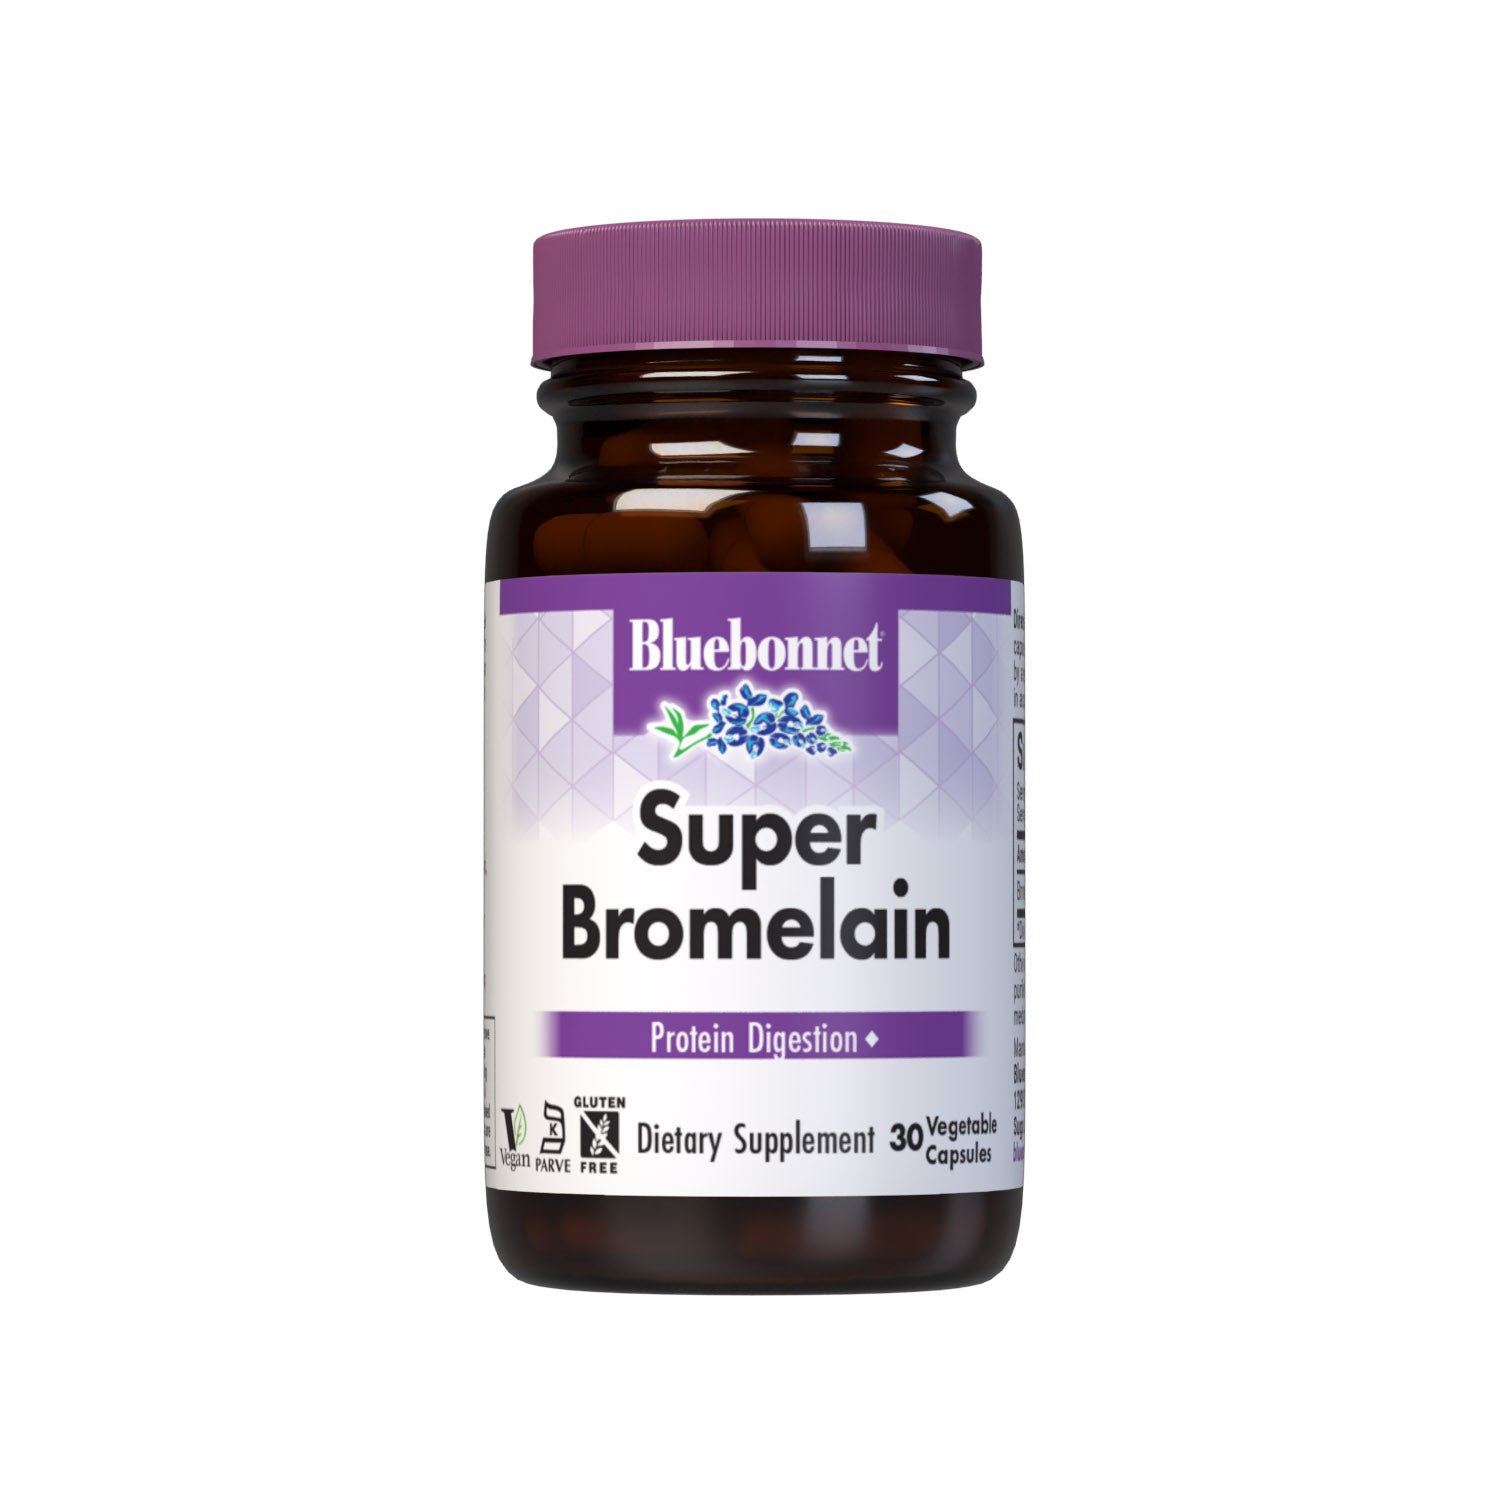 Bluebonnet’s Super Bromelain 500 mg 30 Vegetable Capsules are formulated with 2400 GDU/gm of bromelain from pineapple. Bromelain assists in the digestion of protein. #size_30 count